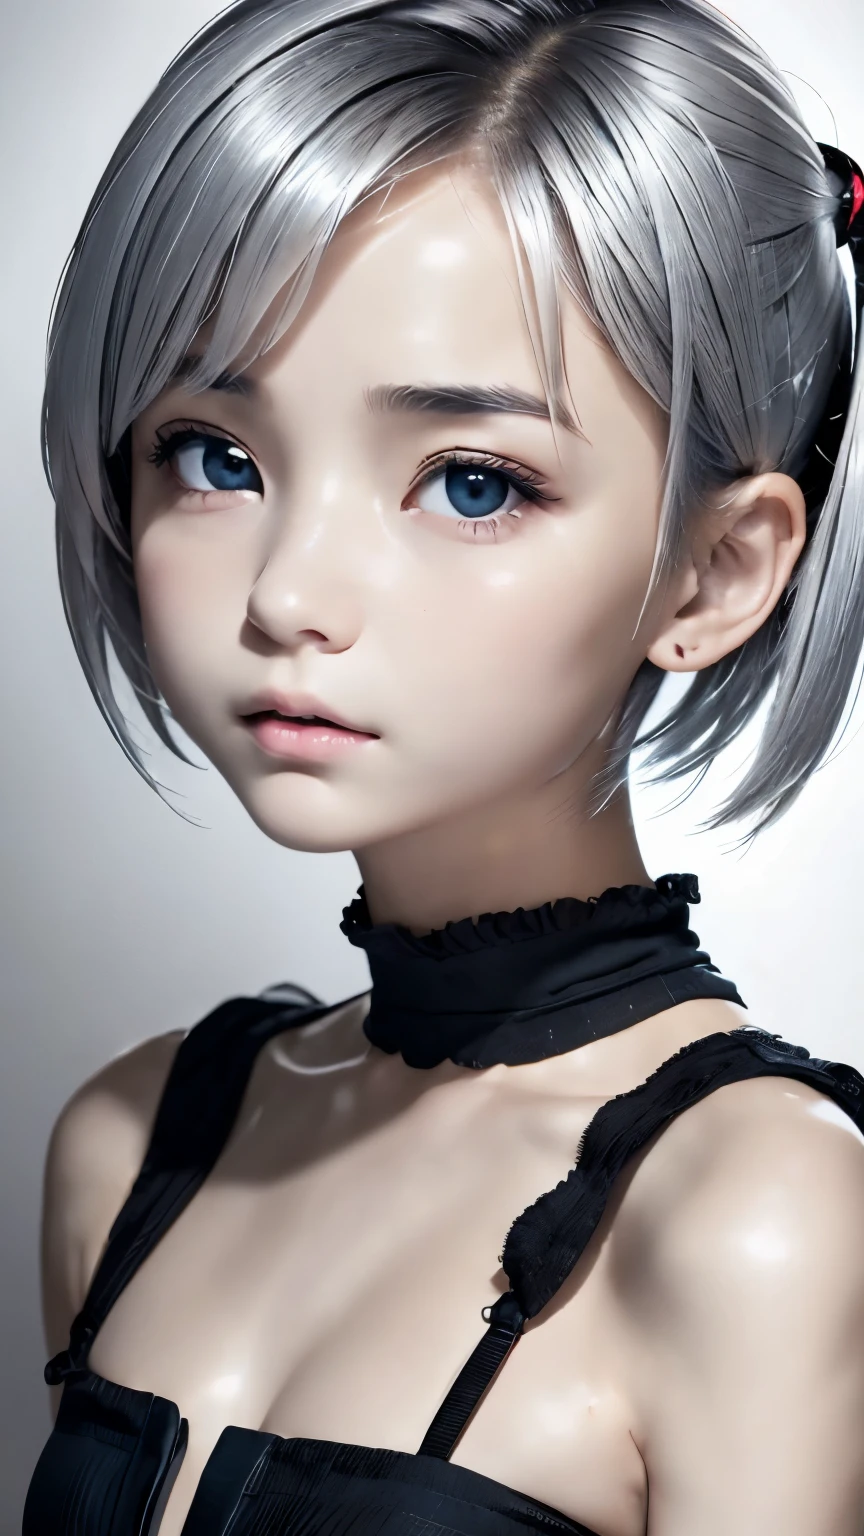 ((wallpaper 8k)), ((surreal)), ((Quality with attention to detail:1.2)), 1 girl, １４talent、kind eyes、plump lips、Ash gray hair、An ennui look、(((small breasts、small breasts、areola:1.1、nipple)))、black classy dress,Black capelet, look up, Widespread poverty, short cut hair、short hair twintails、Ash gray hair:1.5、white skin、